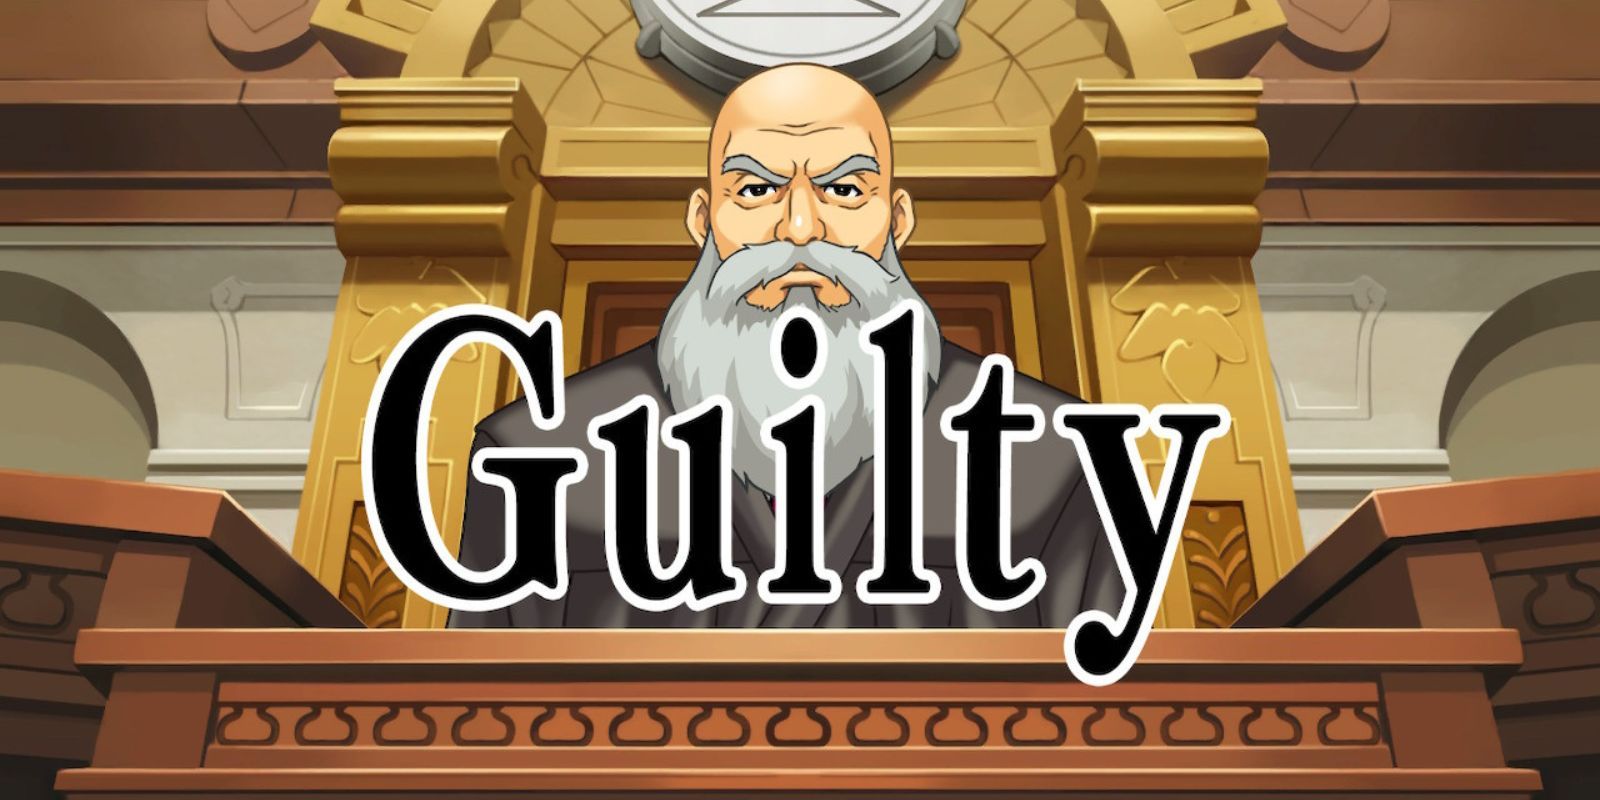 apollo-justice-ace-attorney-guilty-verdict-with-an-angry-judge.jpg